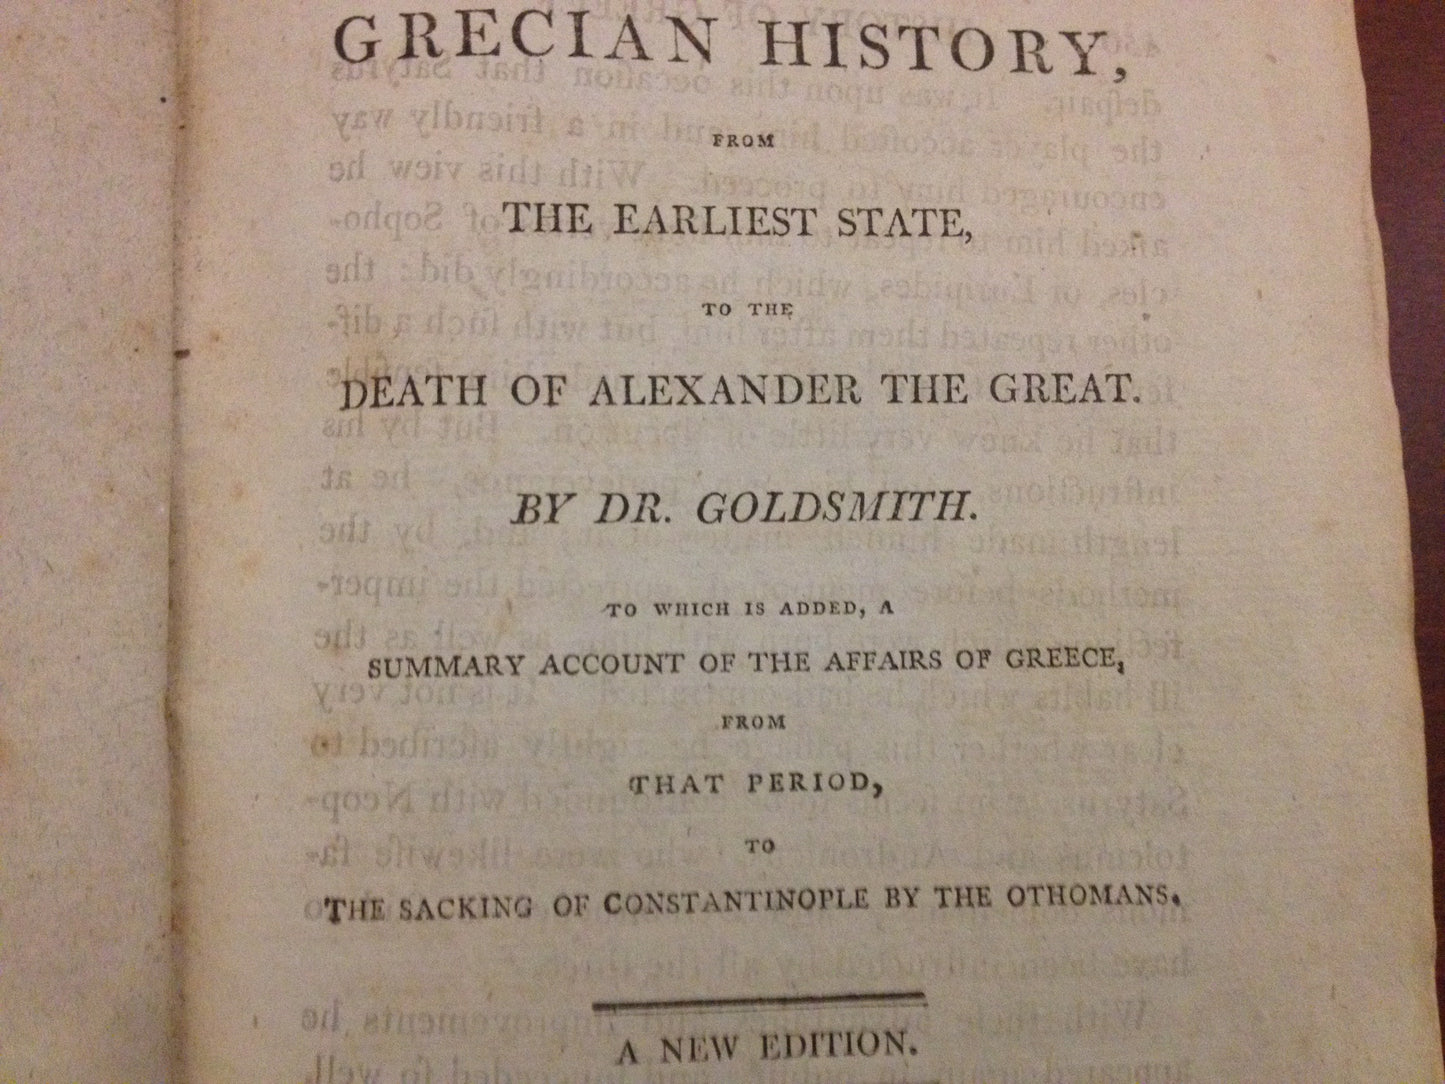 THE GRECIAN HISTORY, FROM THE EARLIEST STATE - TO THE DEATH OF ALEXANDER THE GREAT  BY: DR. GOLDSMITH [2 VOLUMES]